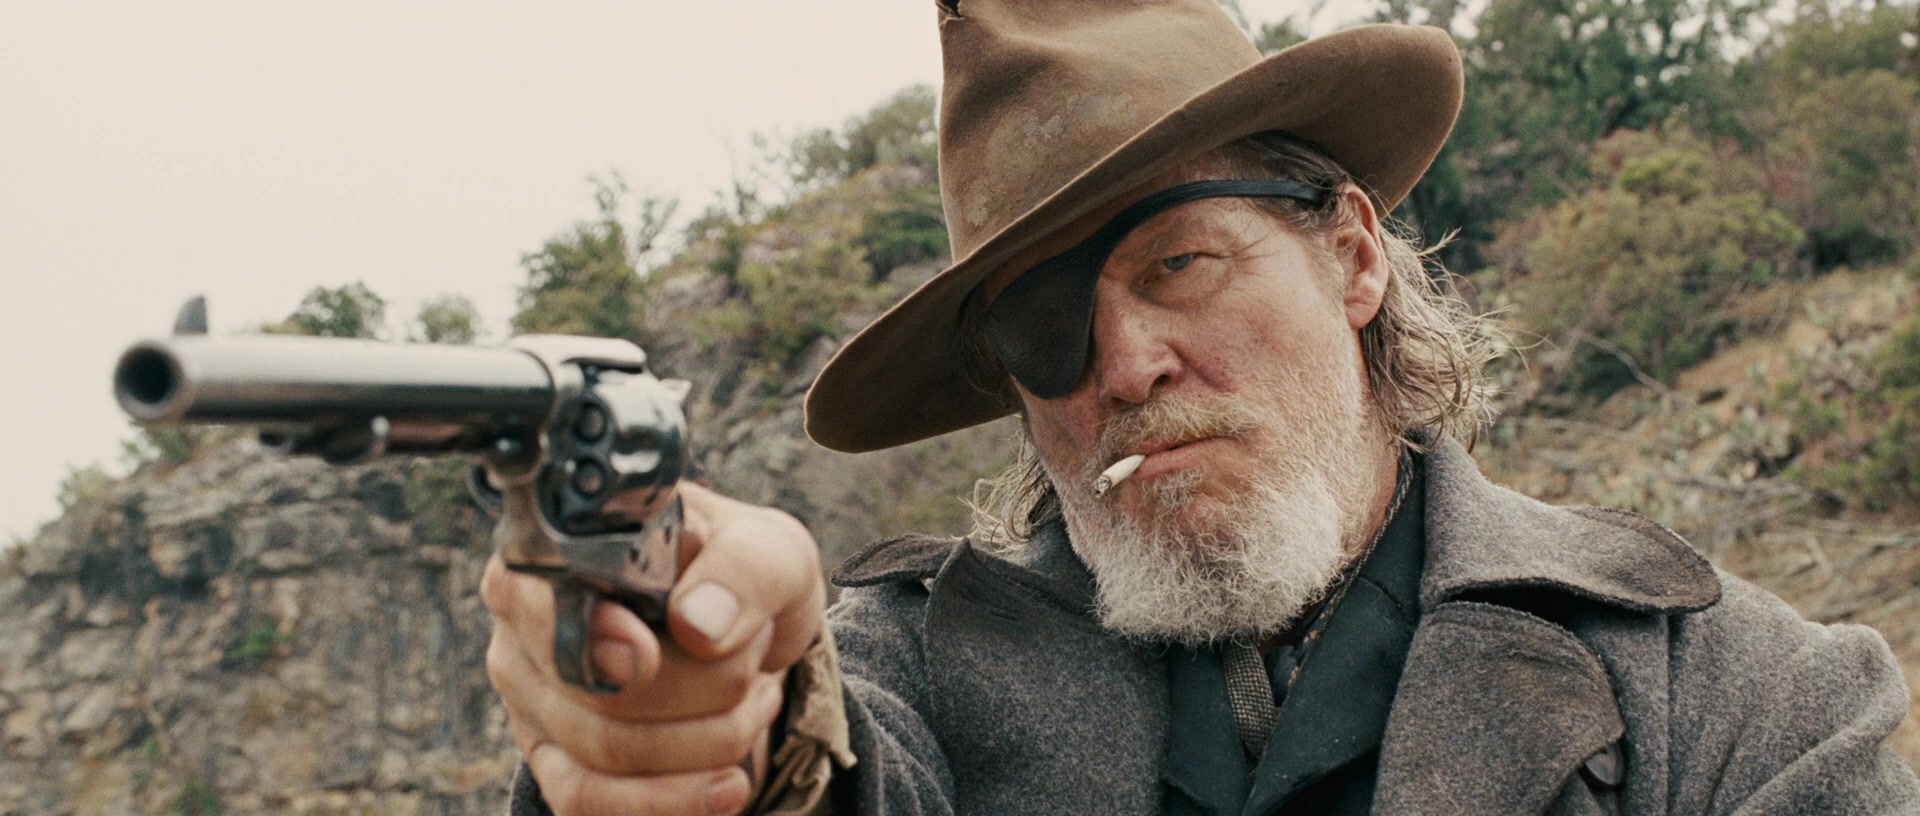 A bearded man with an eyepatch wearing a duster coat and a brown hat holding a revolver in True Grit (2010).